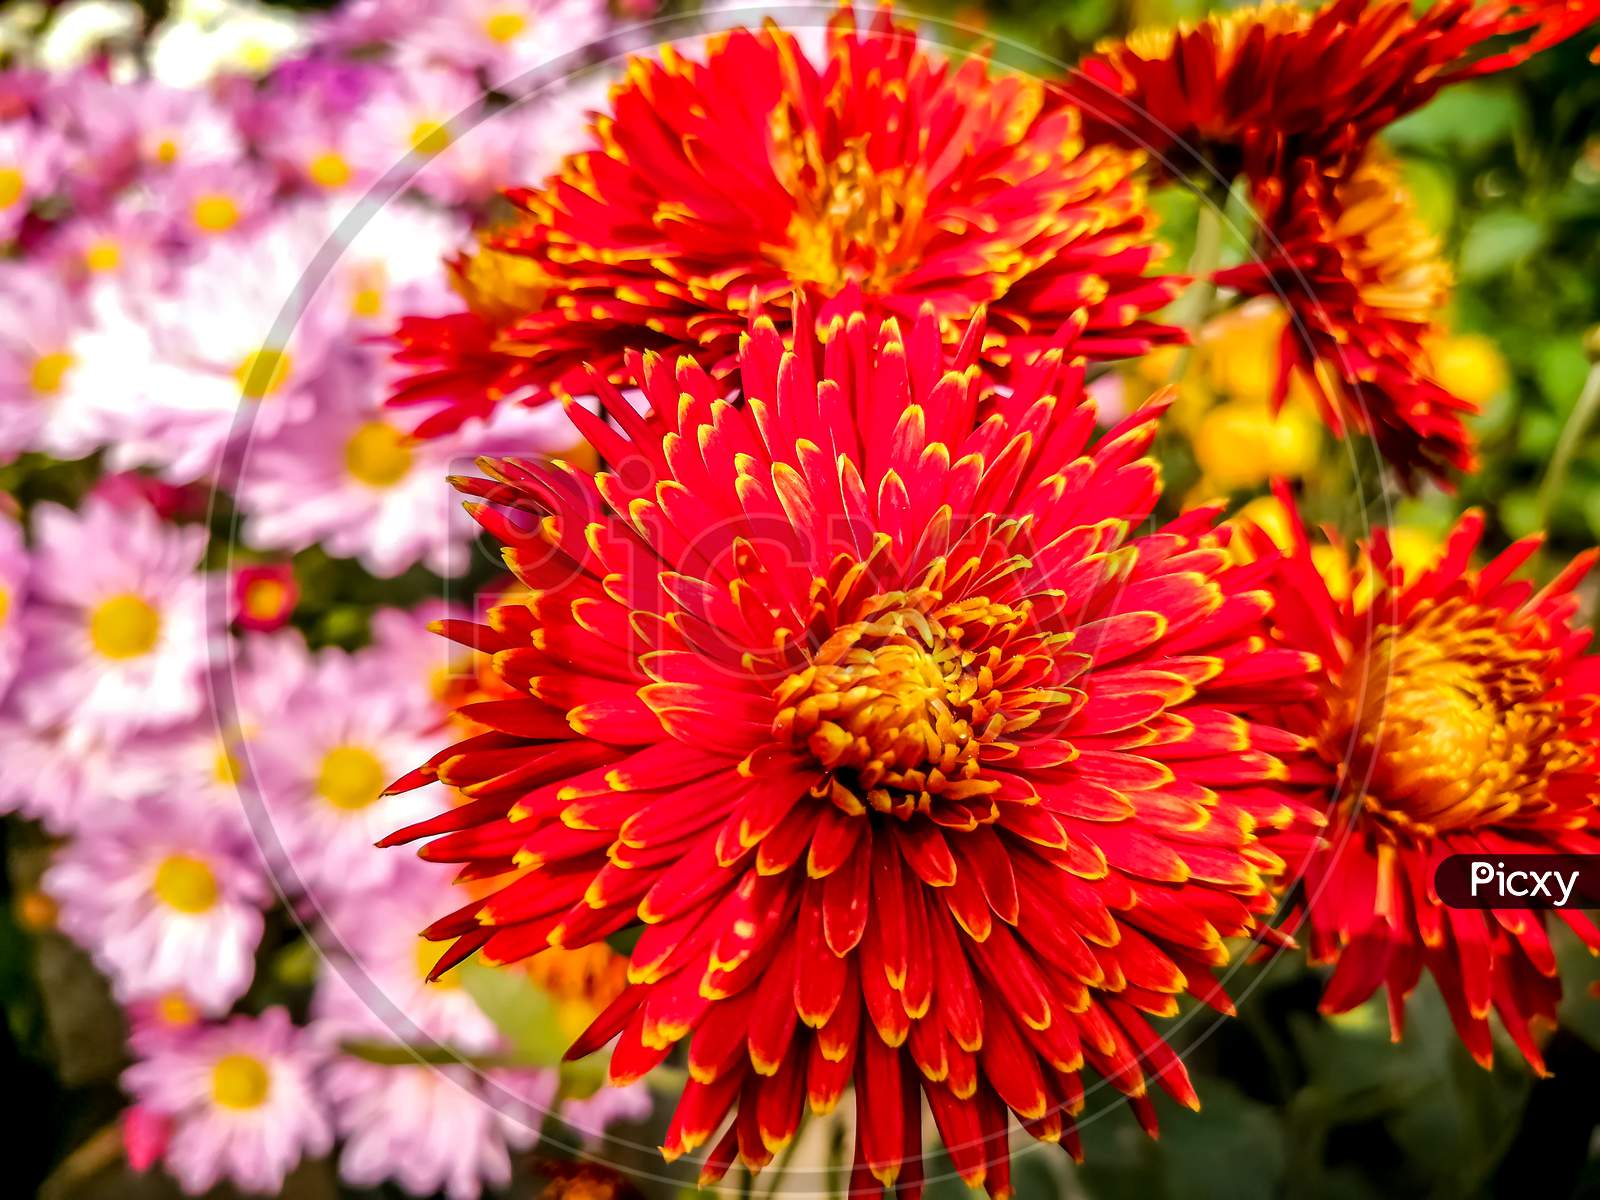 Chrysanthemums (Chandramallika) are one of the most popular fall garden flowers.